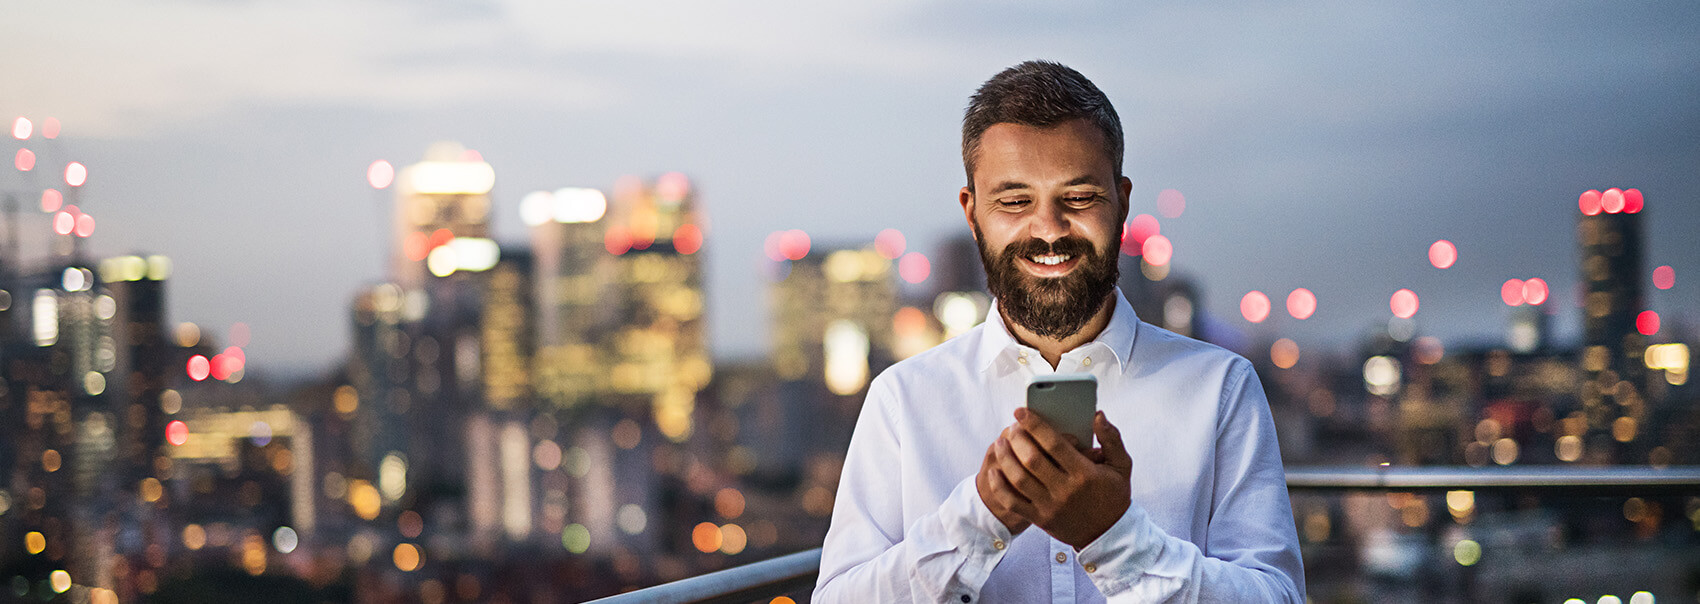 man with beard smiling at his phone with a city scape in the background